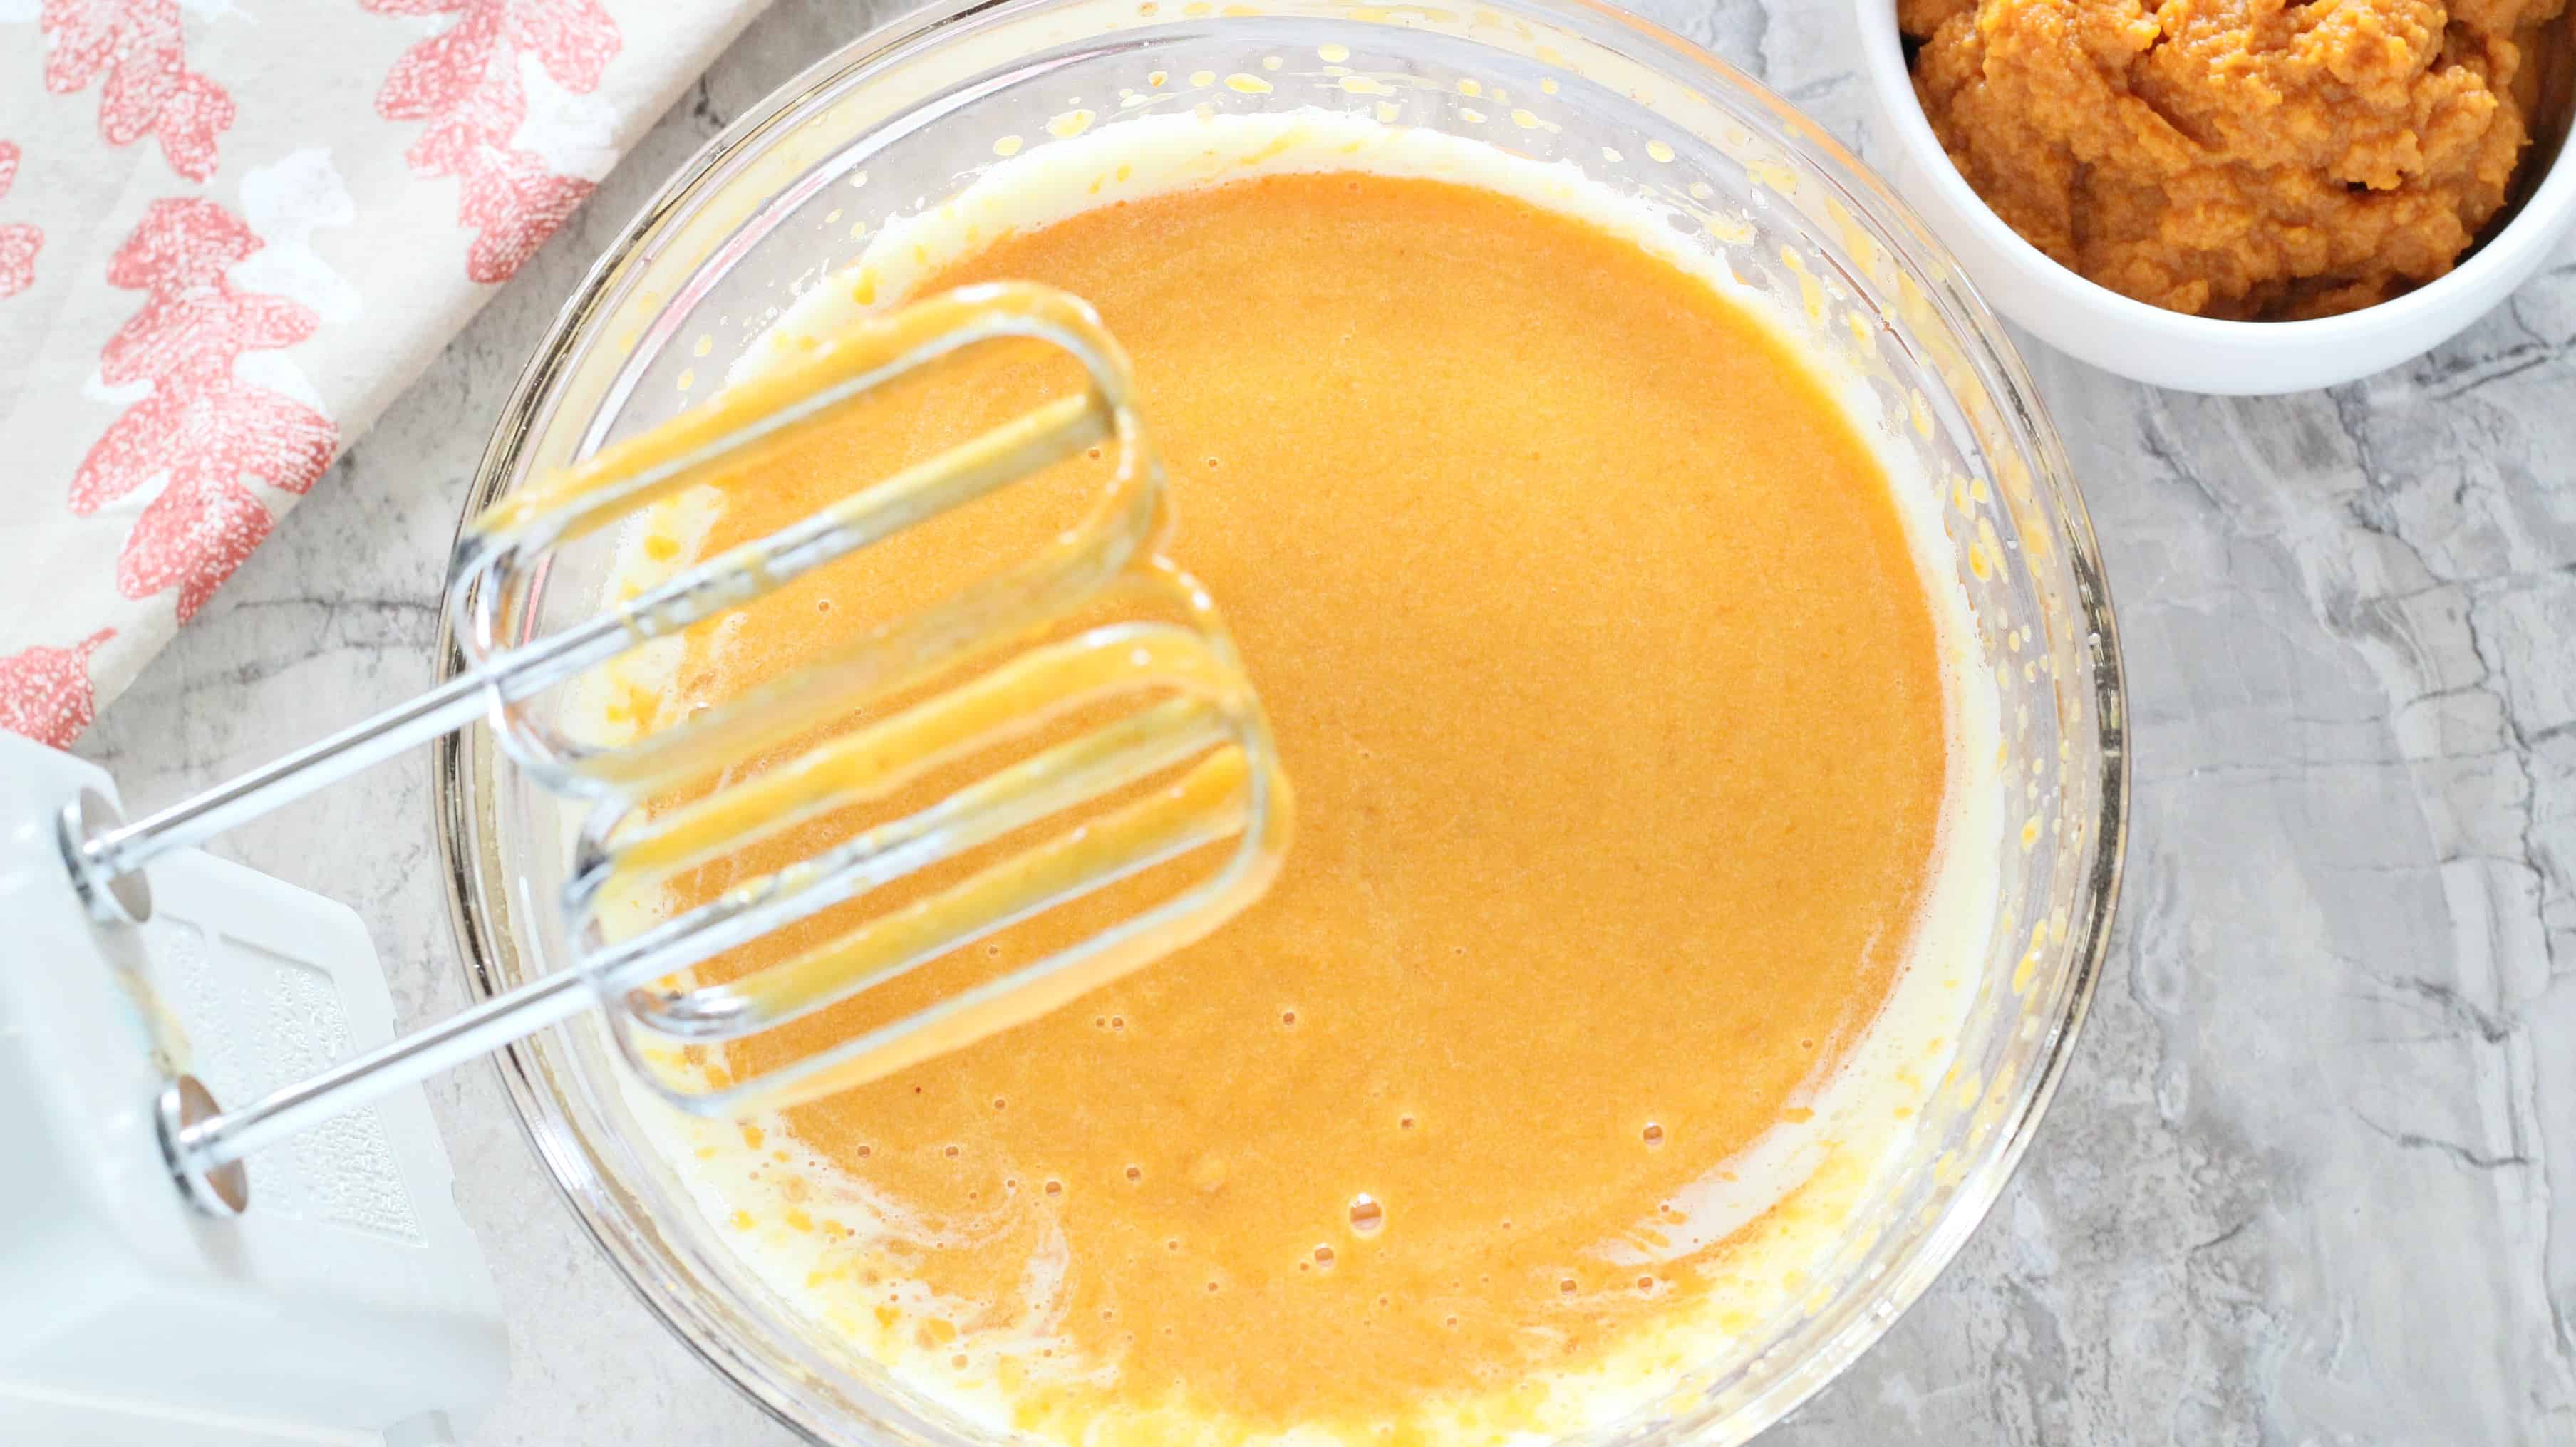 Mix eggs and spices into wet mixtures for Chocolate Chip Pumpkin Cake.